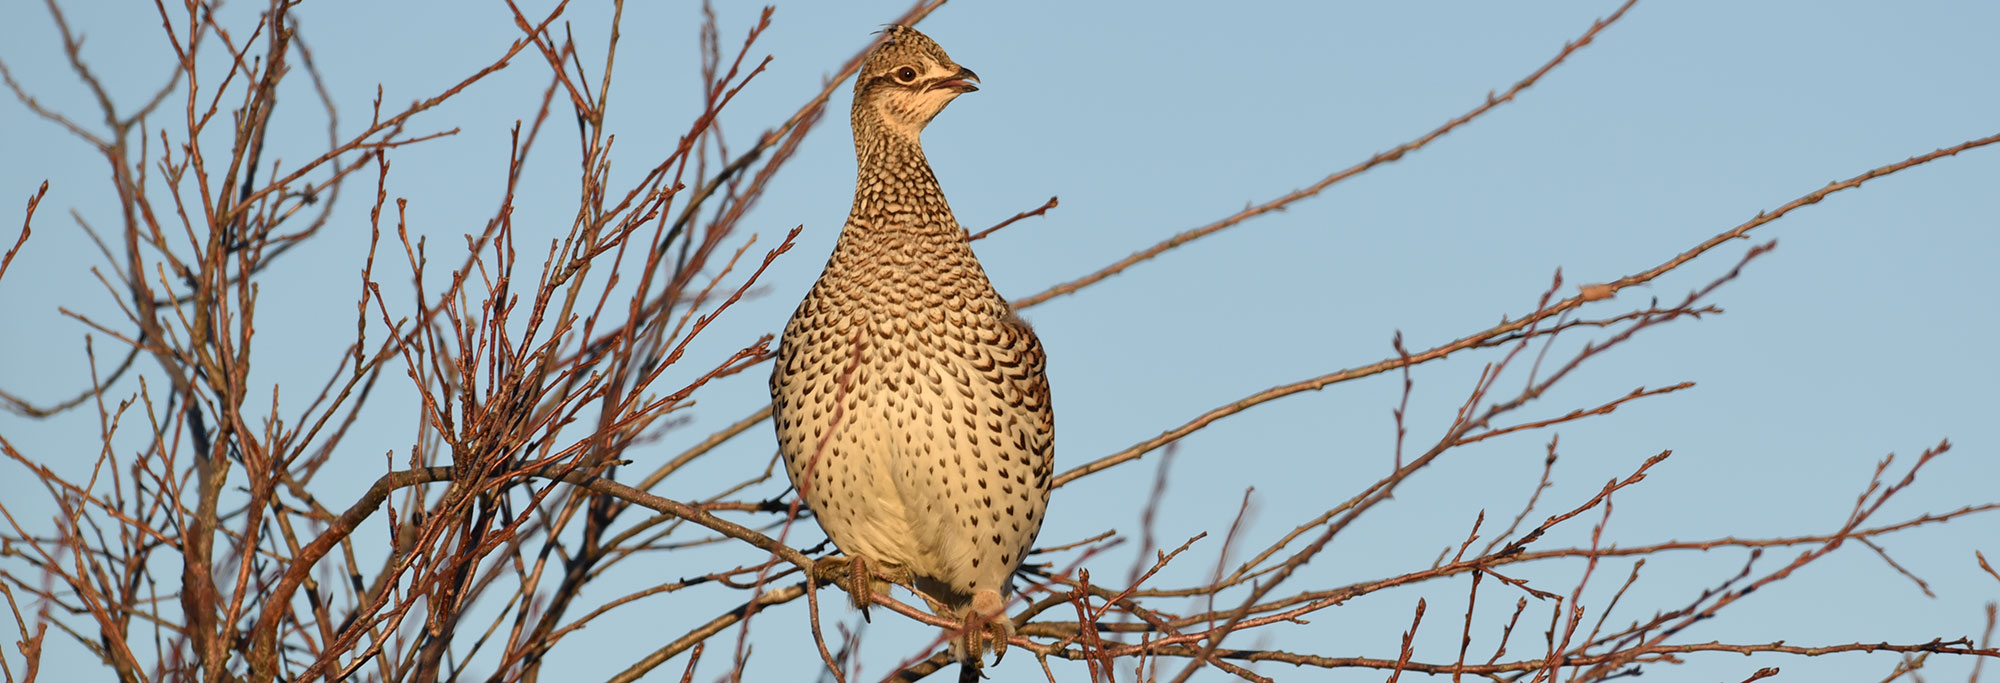 Sharp-tailed grouse in tree